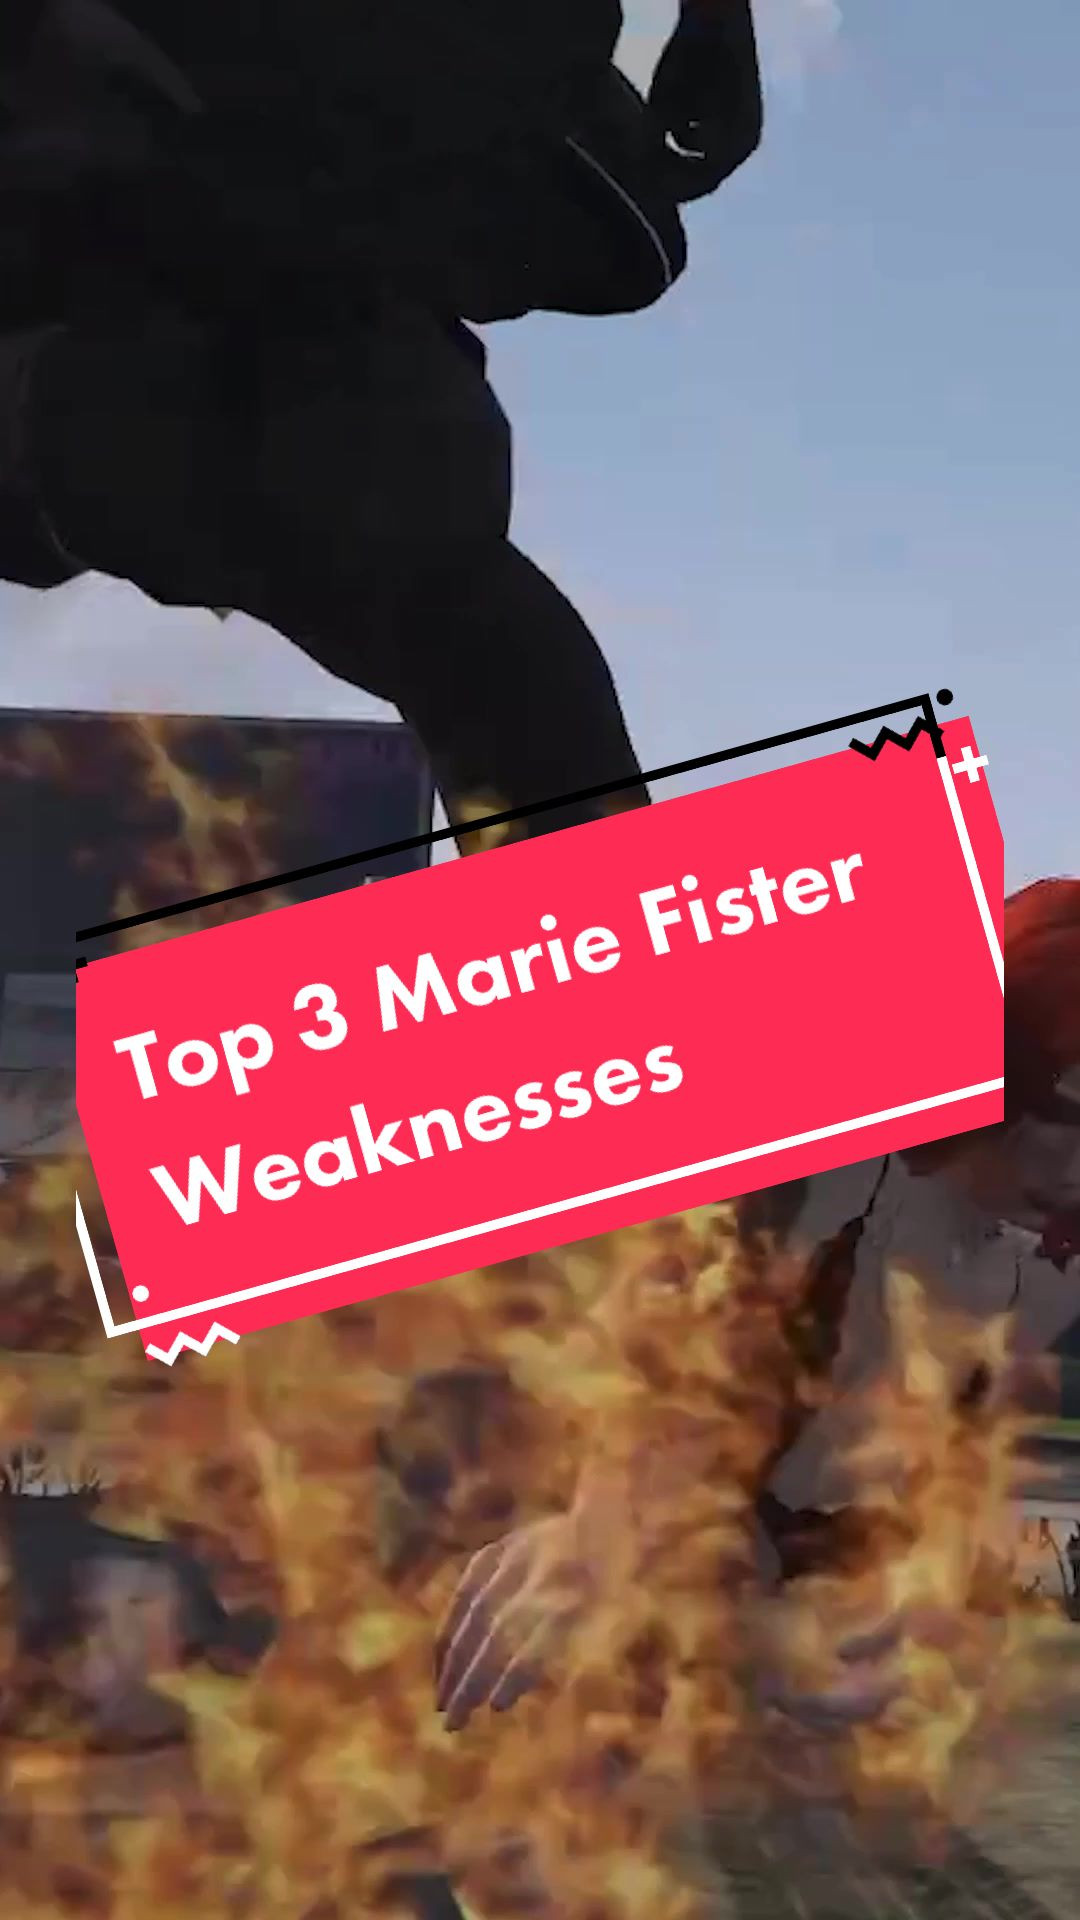 Marie cannot be tamed #mariefister #gtaroleplay #gta5 #gtav #gta5online #twitch 